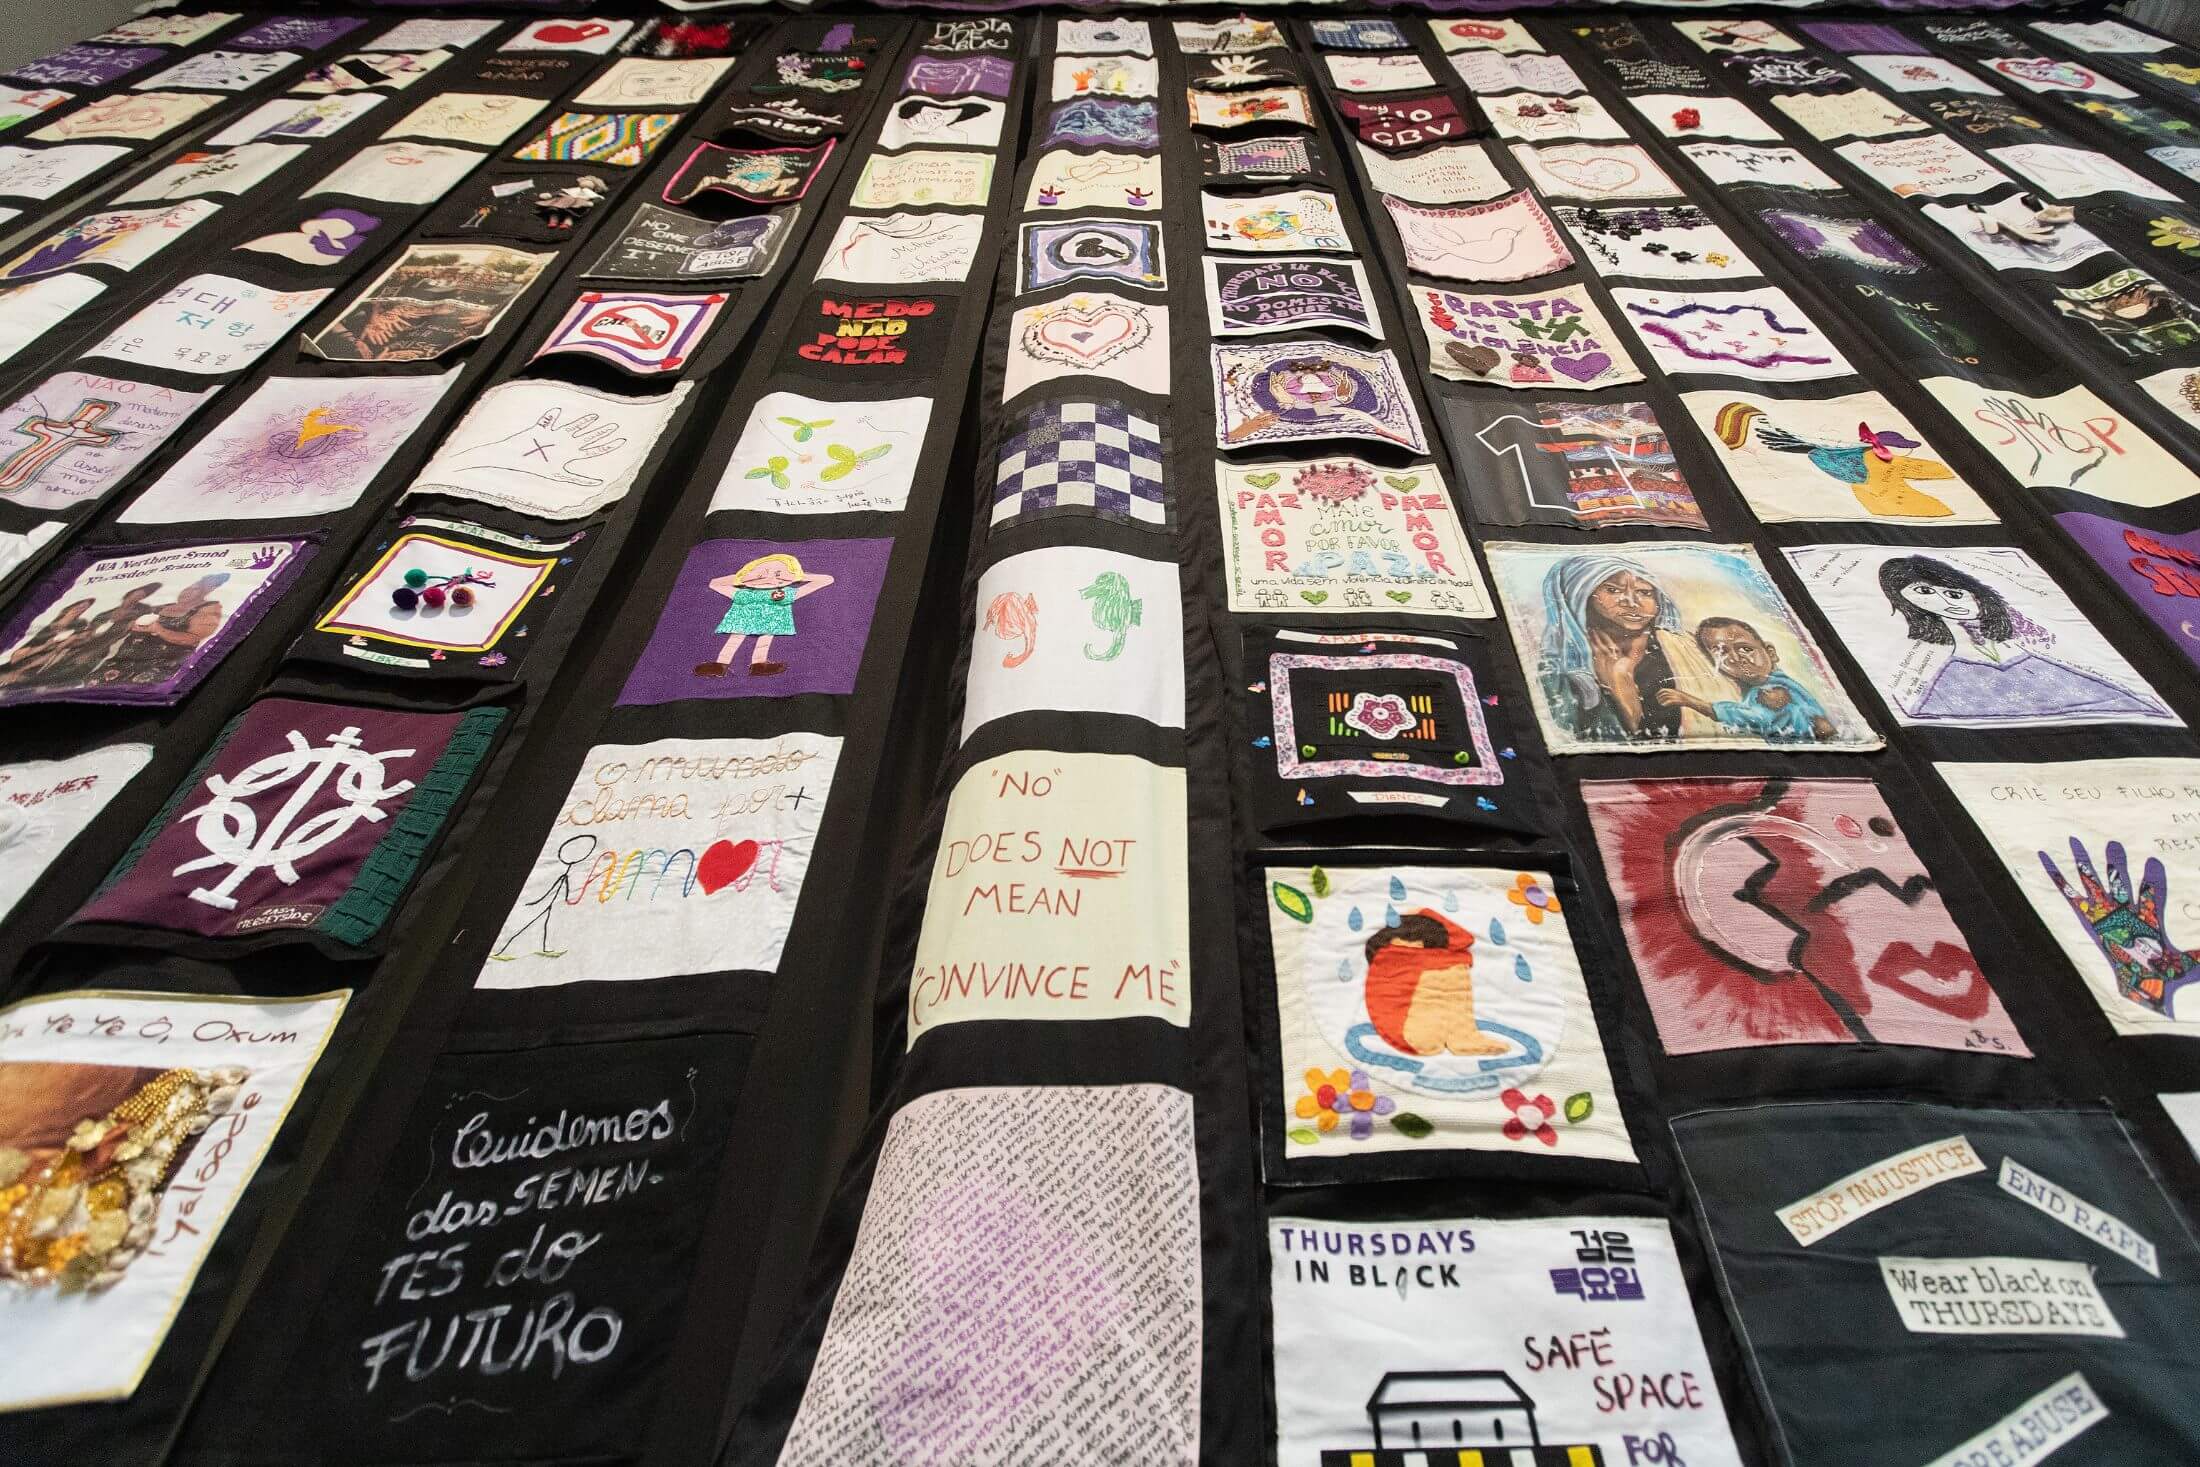 A quilt with fabric blocks depicting girls and women hurt by violence and slogans calling for an end to gender-based violence. Exterior and interior borders are black.